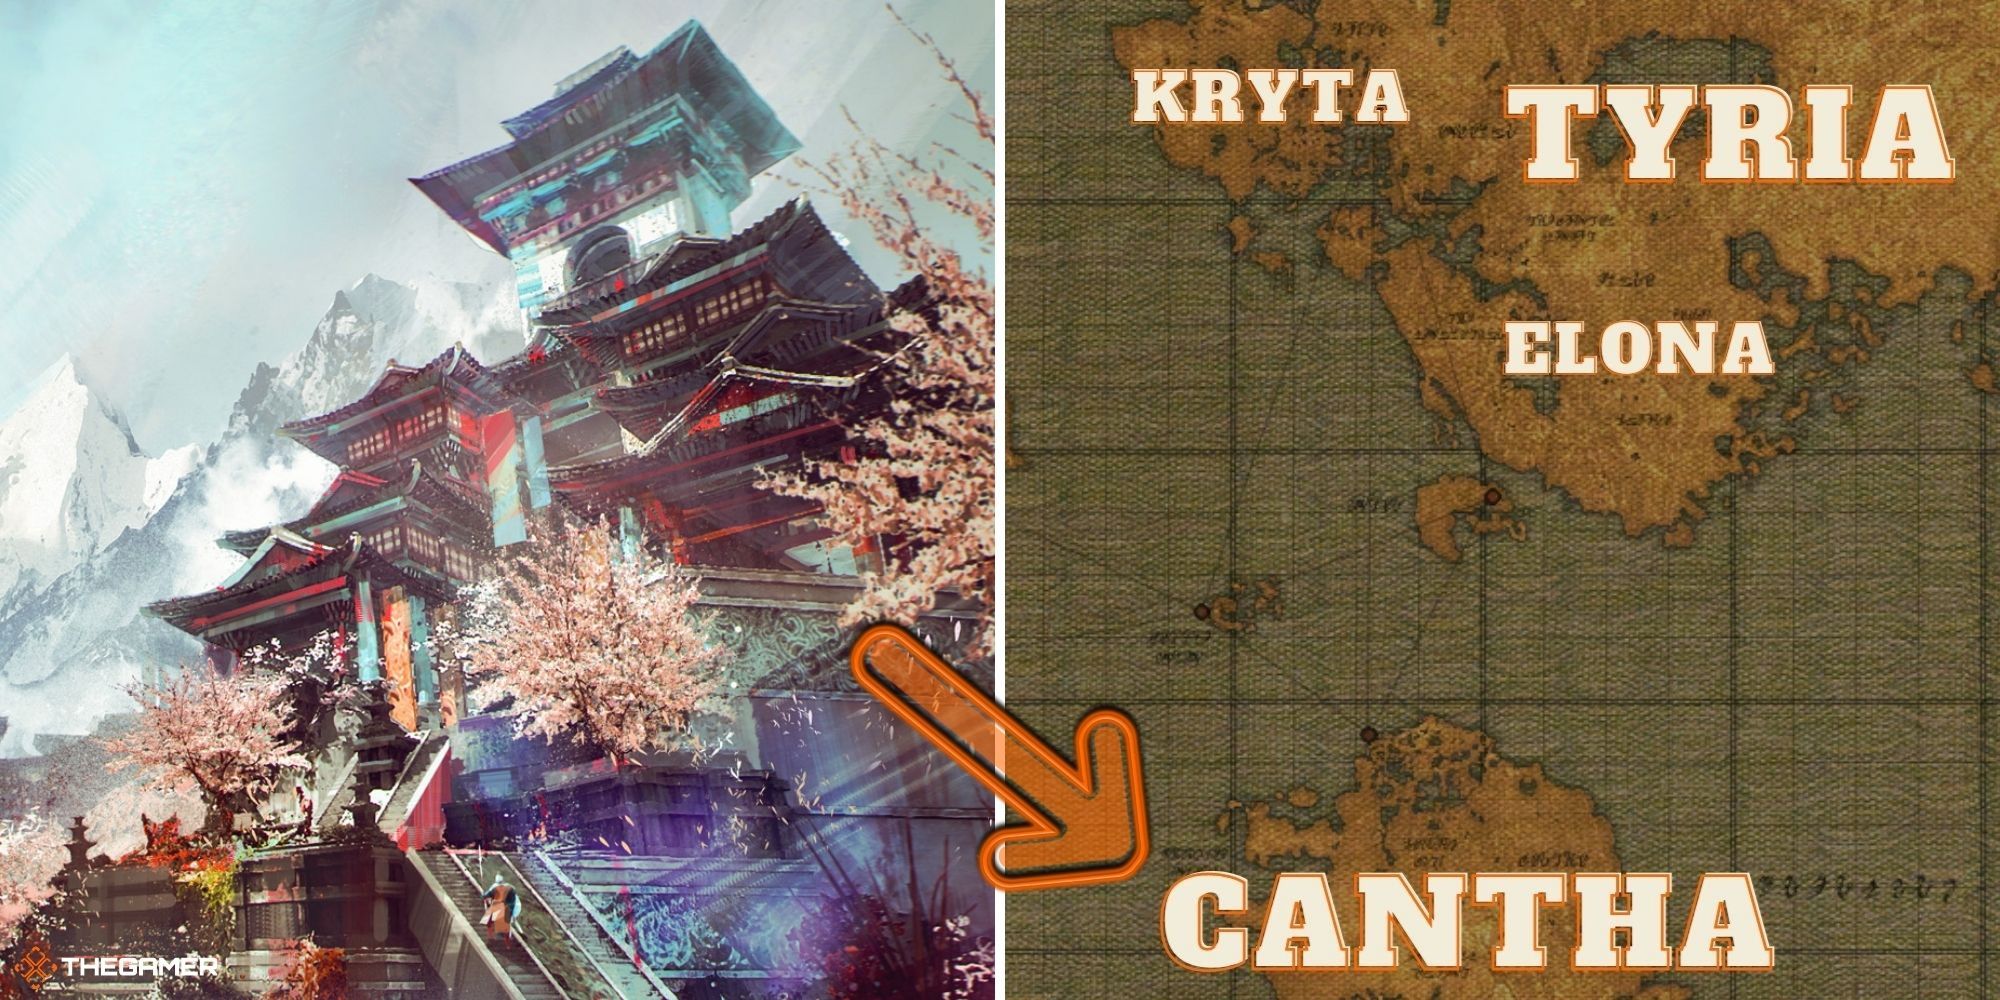 Guild wars 2 end of dragons - map of tyria labelled on right, cantha concept art on right